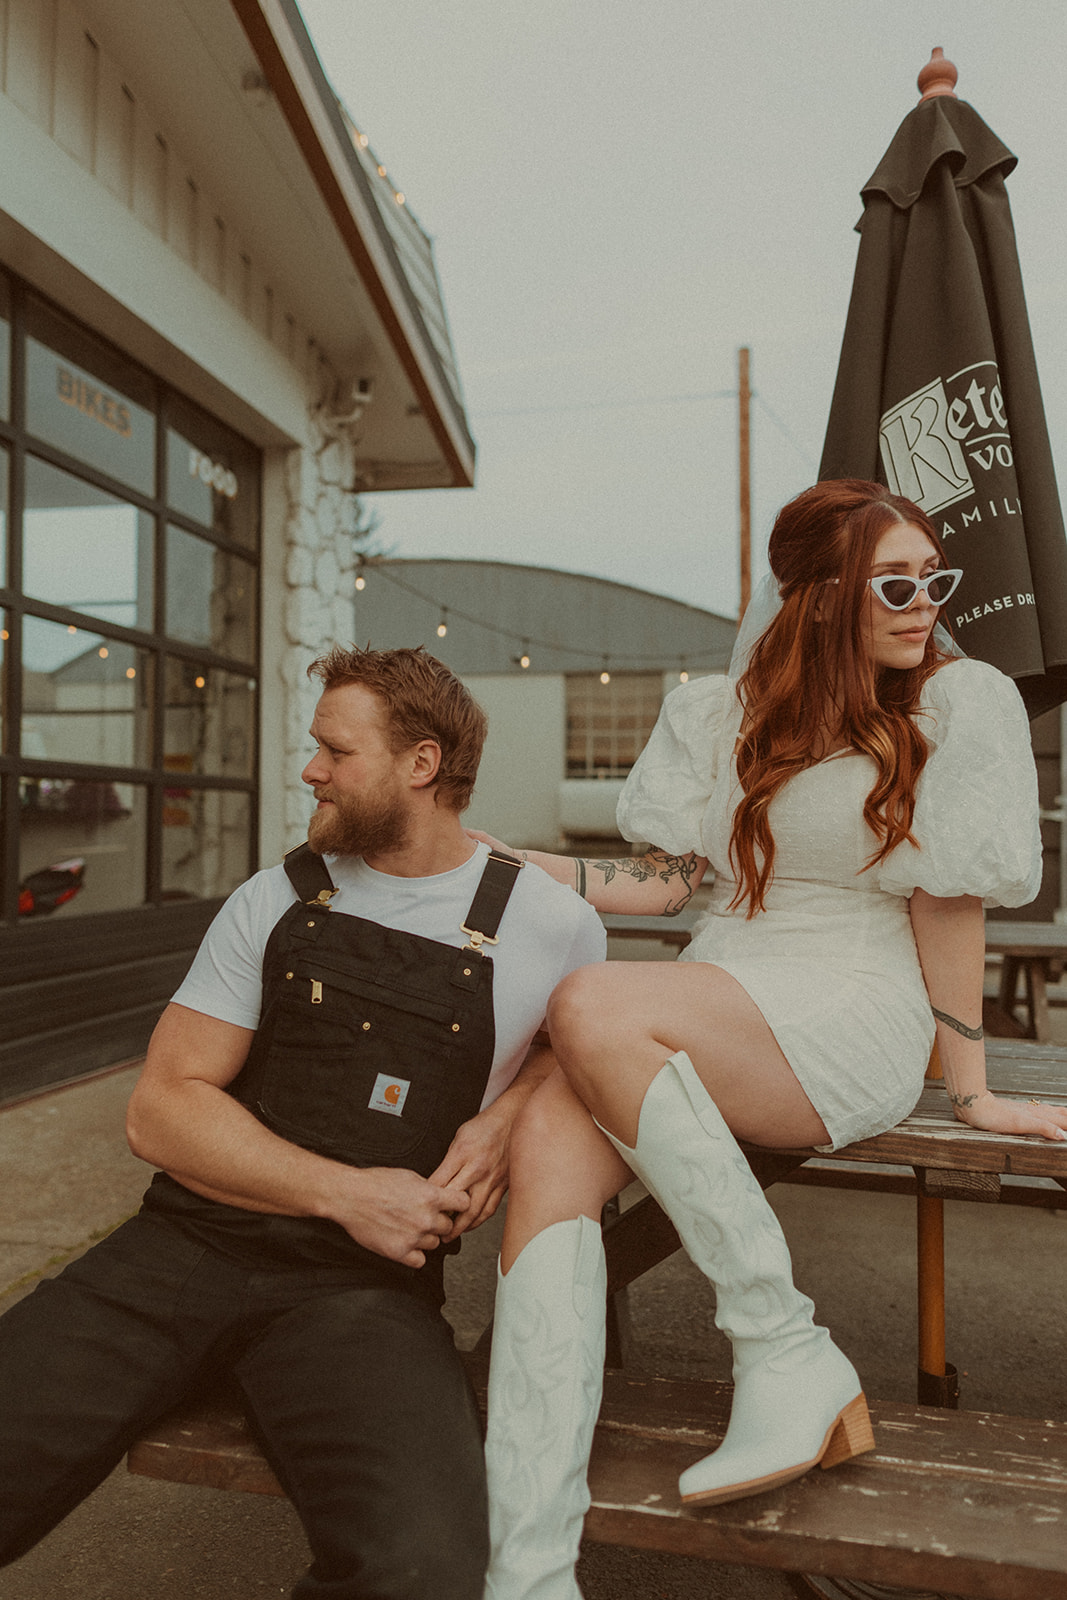 80's inspired outfits for an engagement session in Newberg, Oregon